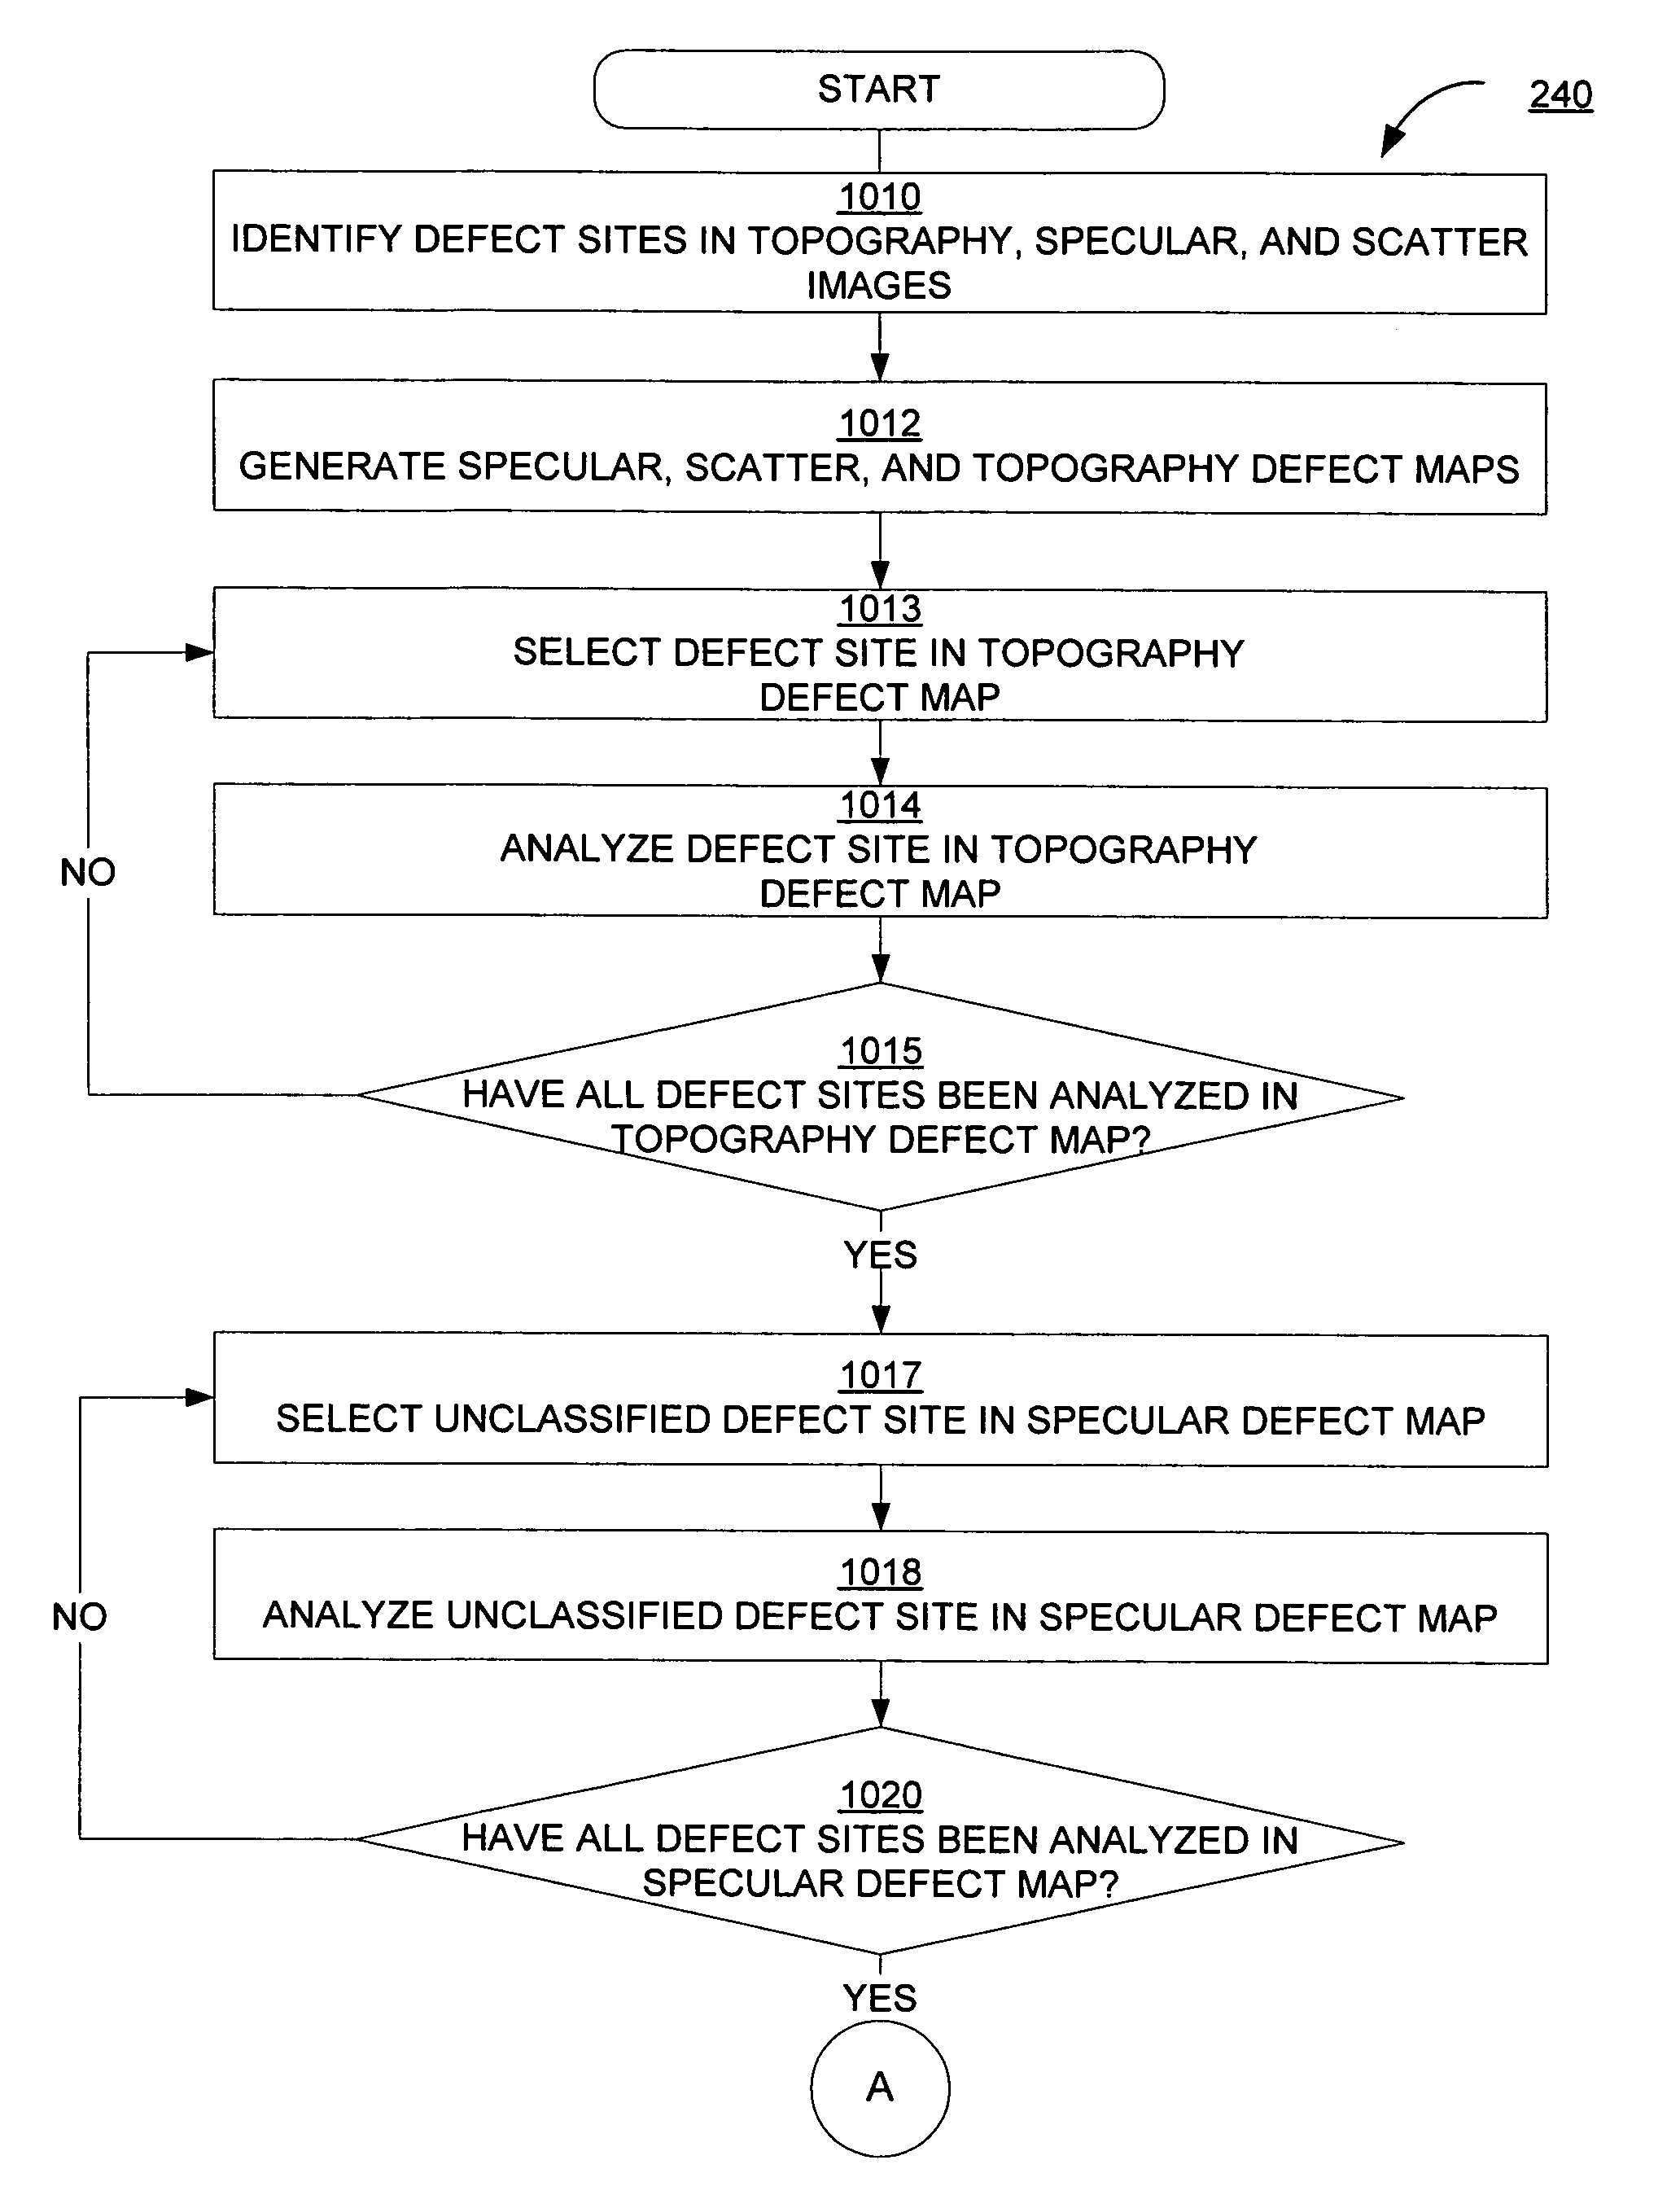 System and method for classifying, detecting, and counting micropipes